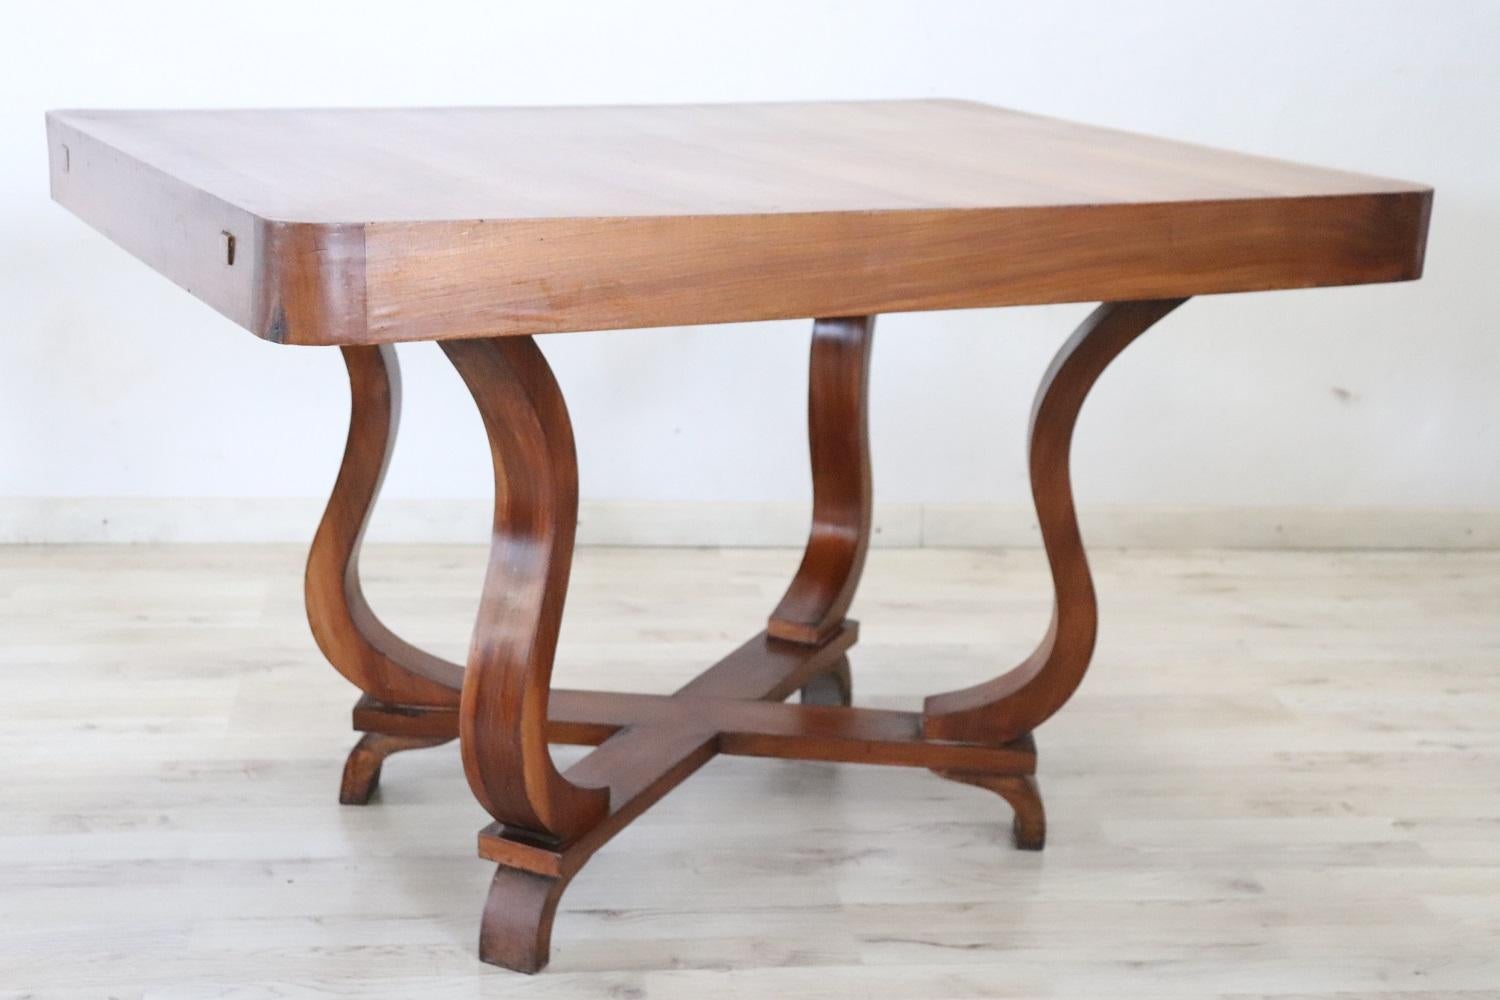 Delicious Italian Art Deco table 1930s. Made of fine veneered walnut. On the sides two supports may contain a small top to extend the table, but the tops have been lost. The four wavy legs that support the top are beautiful. Perfect table for a